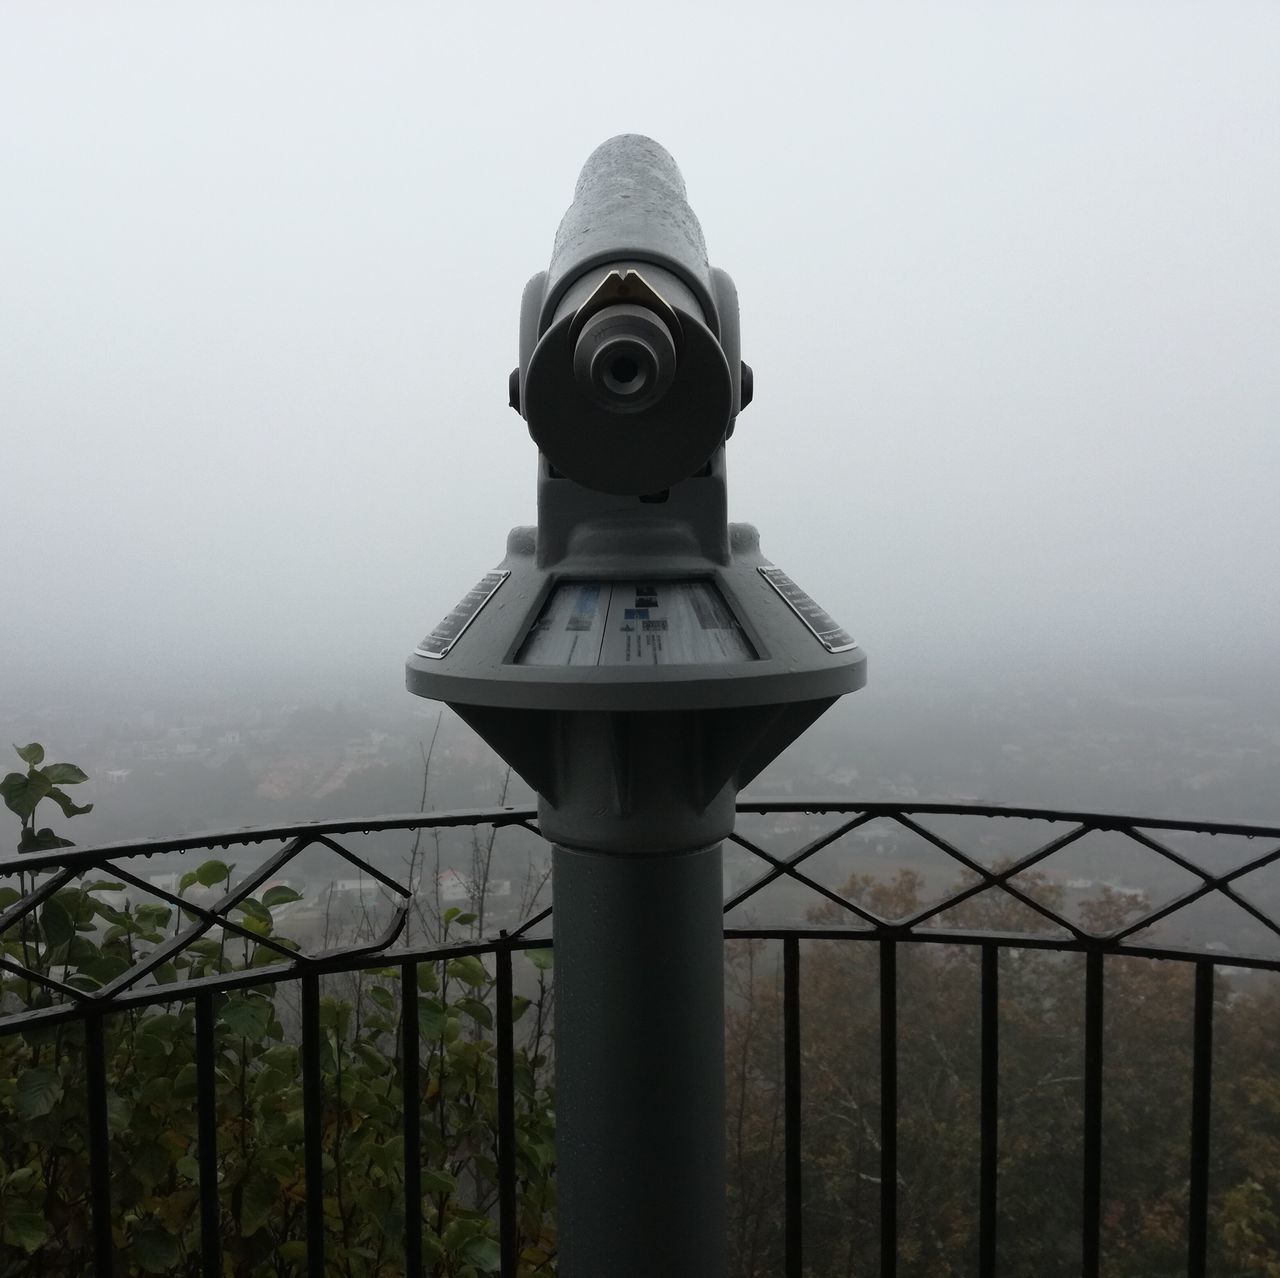 coin operated, coin-operated binoculars, binoculars, hand-held telescope, fog, surveillance, metal, railing, telescope, no people, outdoors, day, architecture, built structure, travel destinations, building exterior, water, sky, close-up, cityscape, city, scenics, nature, technology